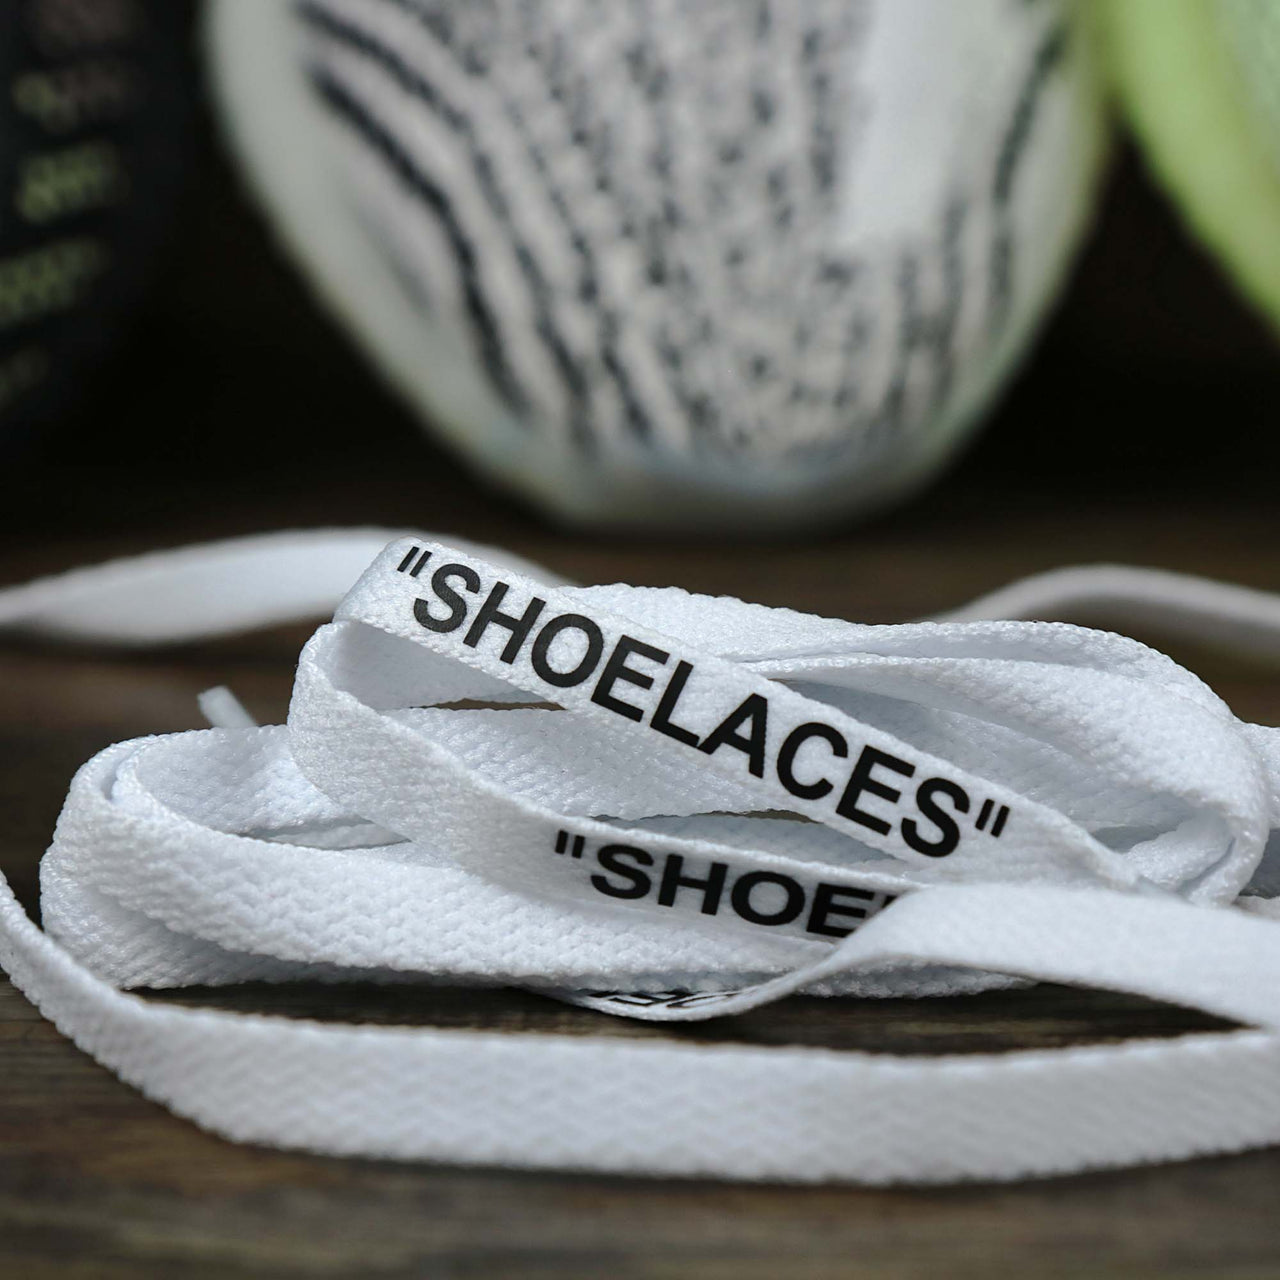 The Flat White Shoelaces with “Shoelaces” Print | 120cm Capswag unfolded